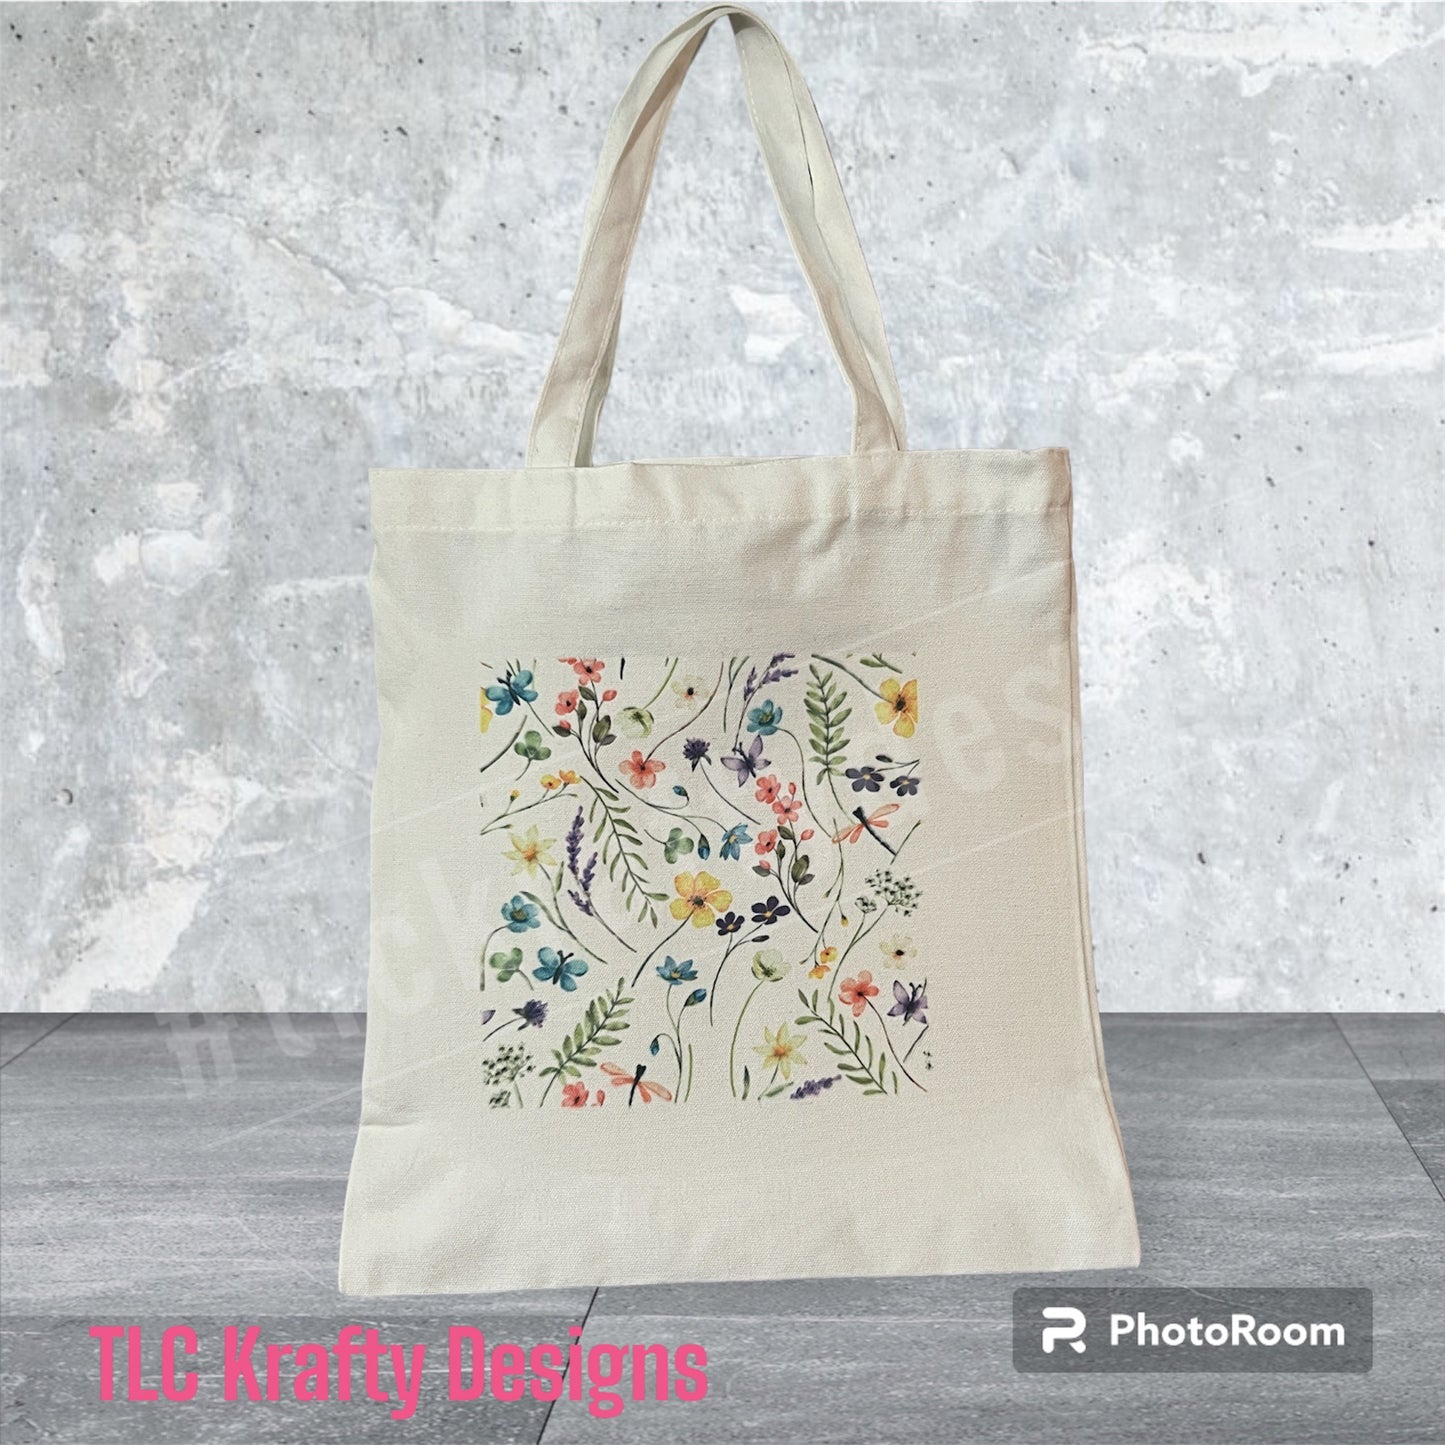 Enchanted Canvas tote adorned with a delightful display of wildflowers